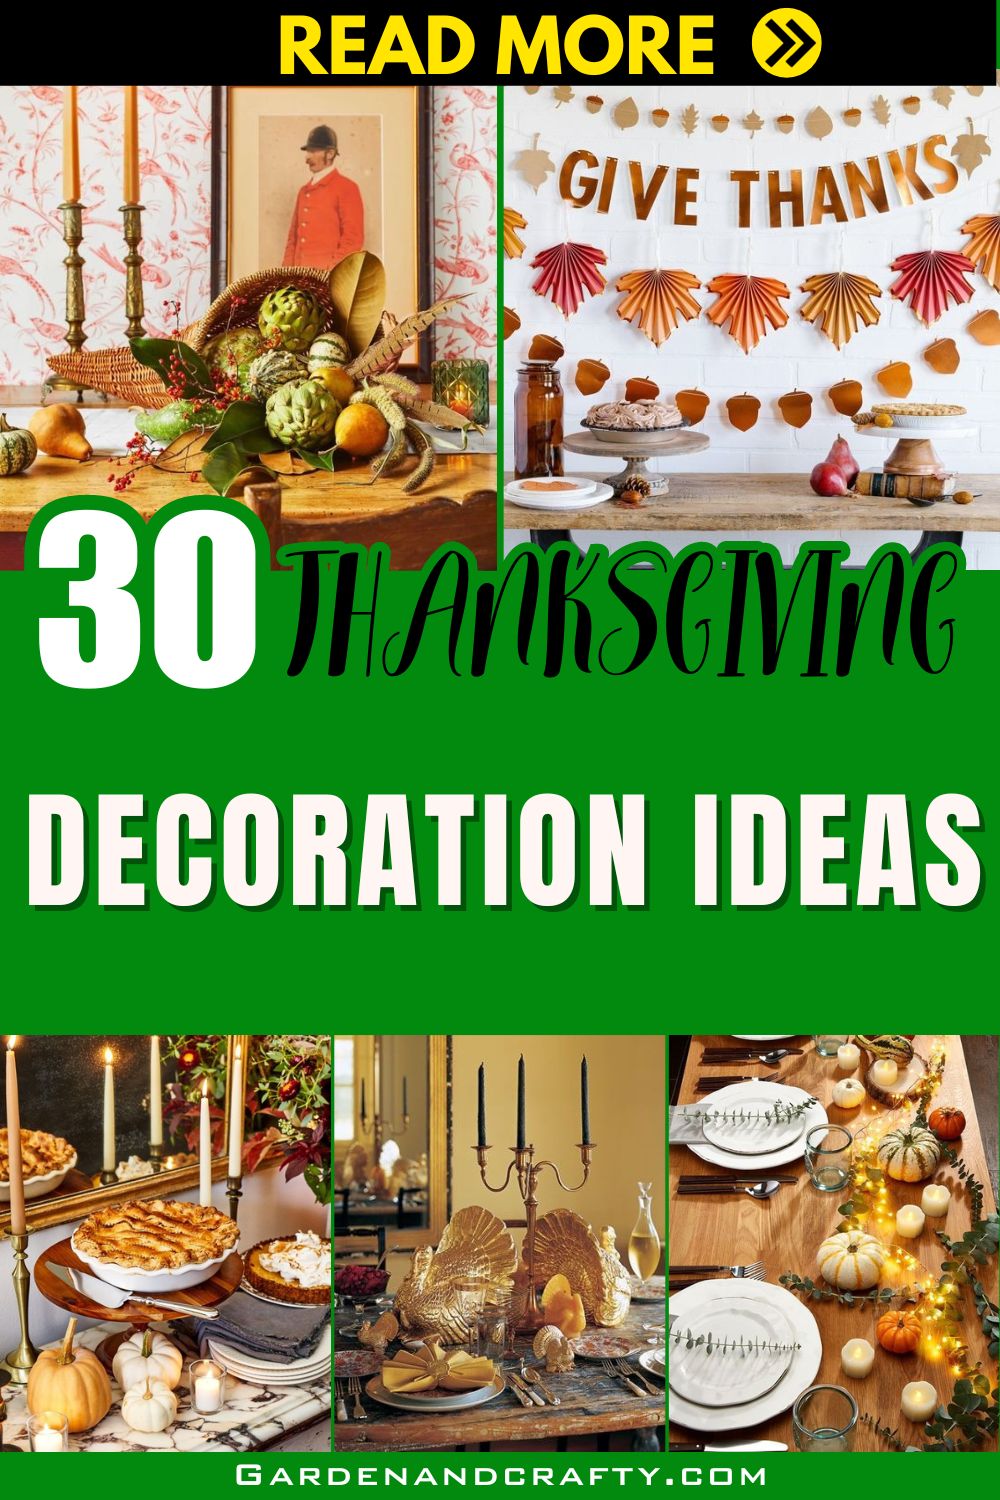 30 Thanksgiving Decoration Ideas That Will Add Sparkle And Glamour To Your Home